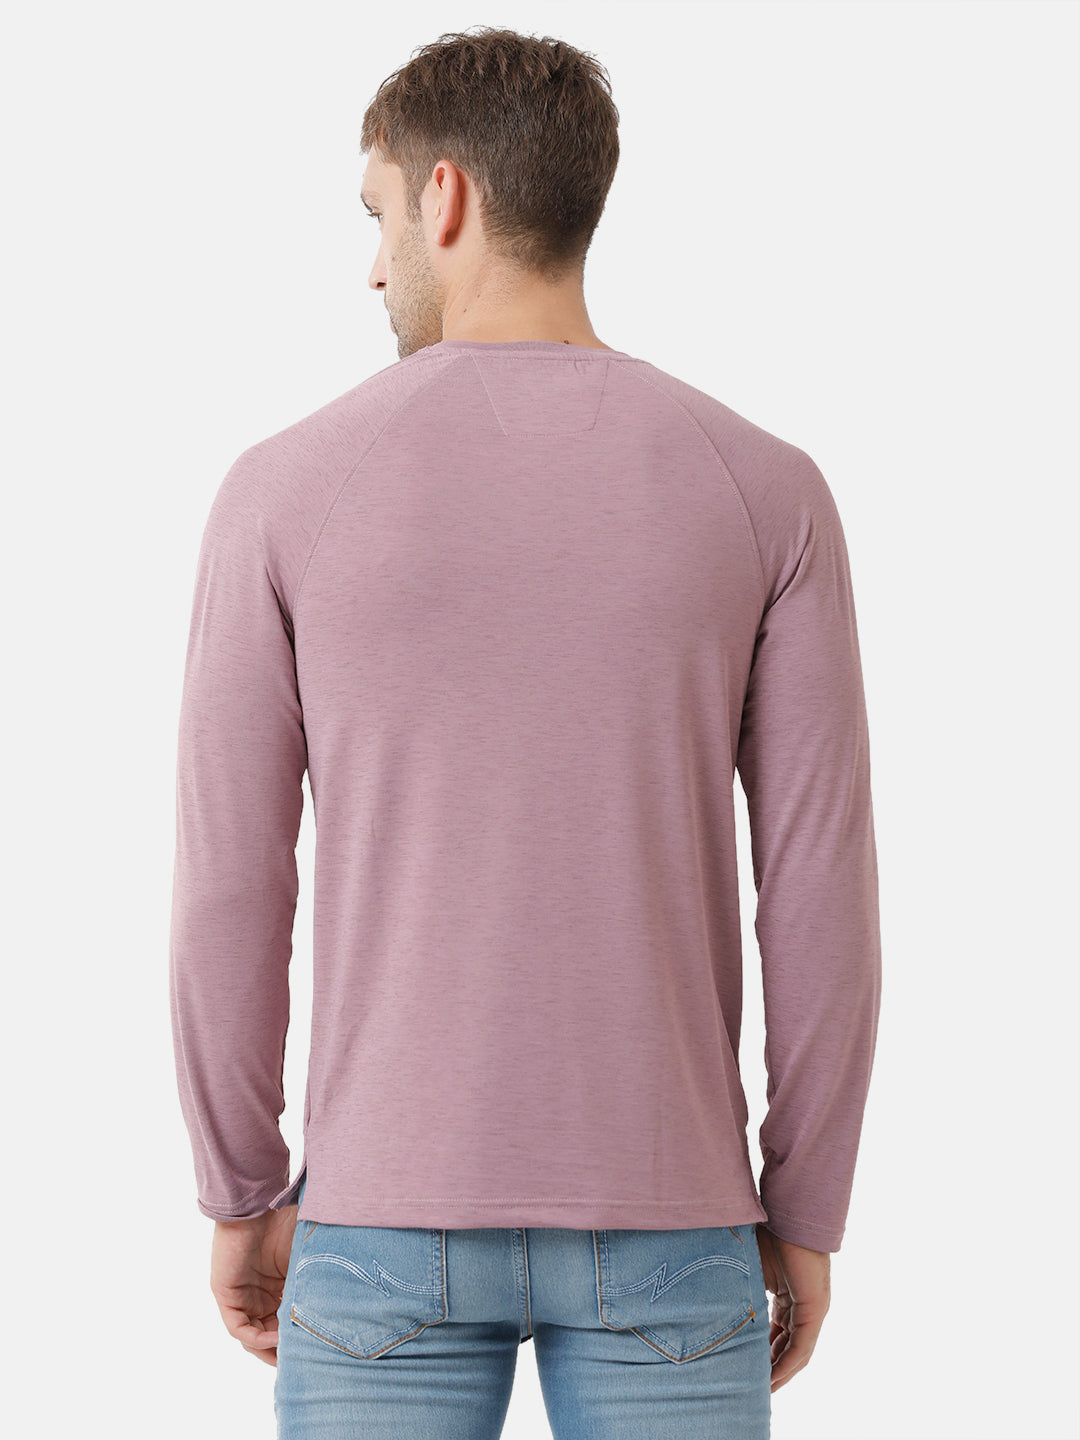 Classic Polo Mens Cotton Full Sleeve Solid Slim Fit Y-Neck Lavender Color T-Shirt | Verno 304 A